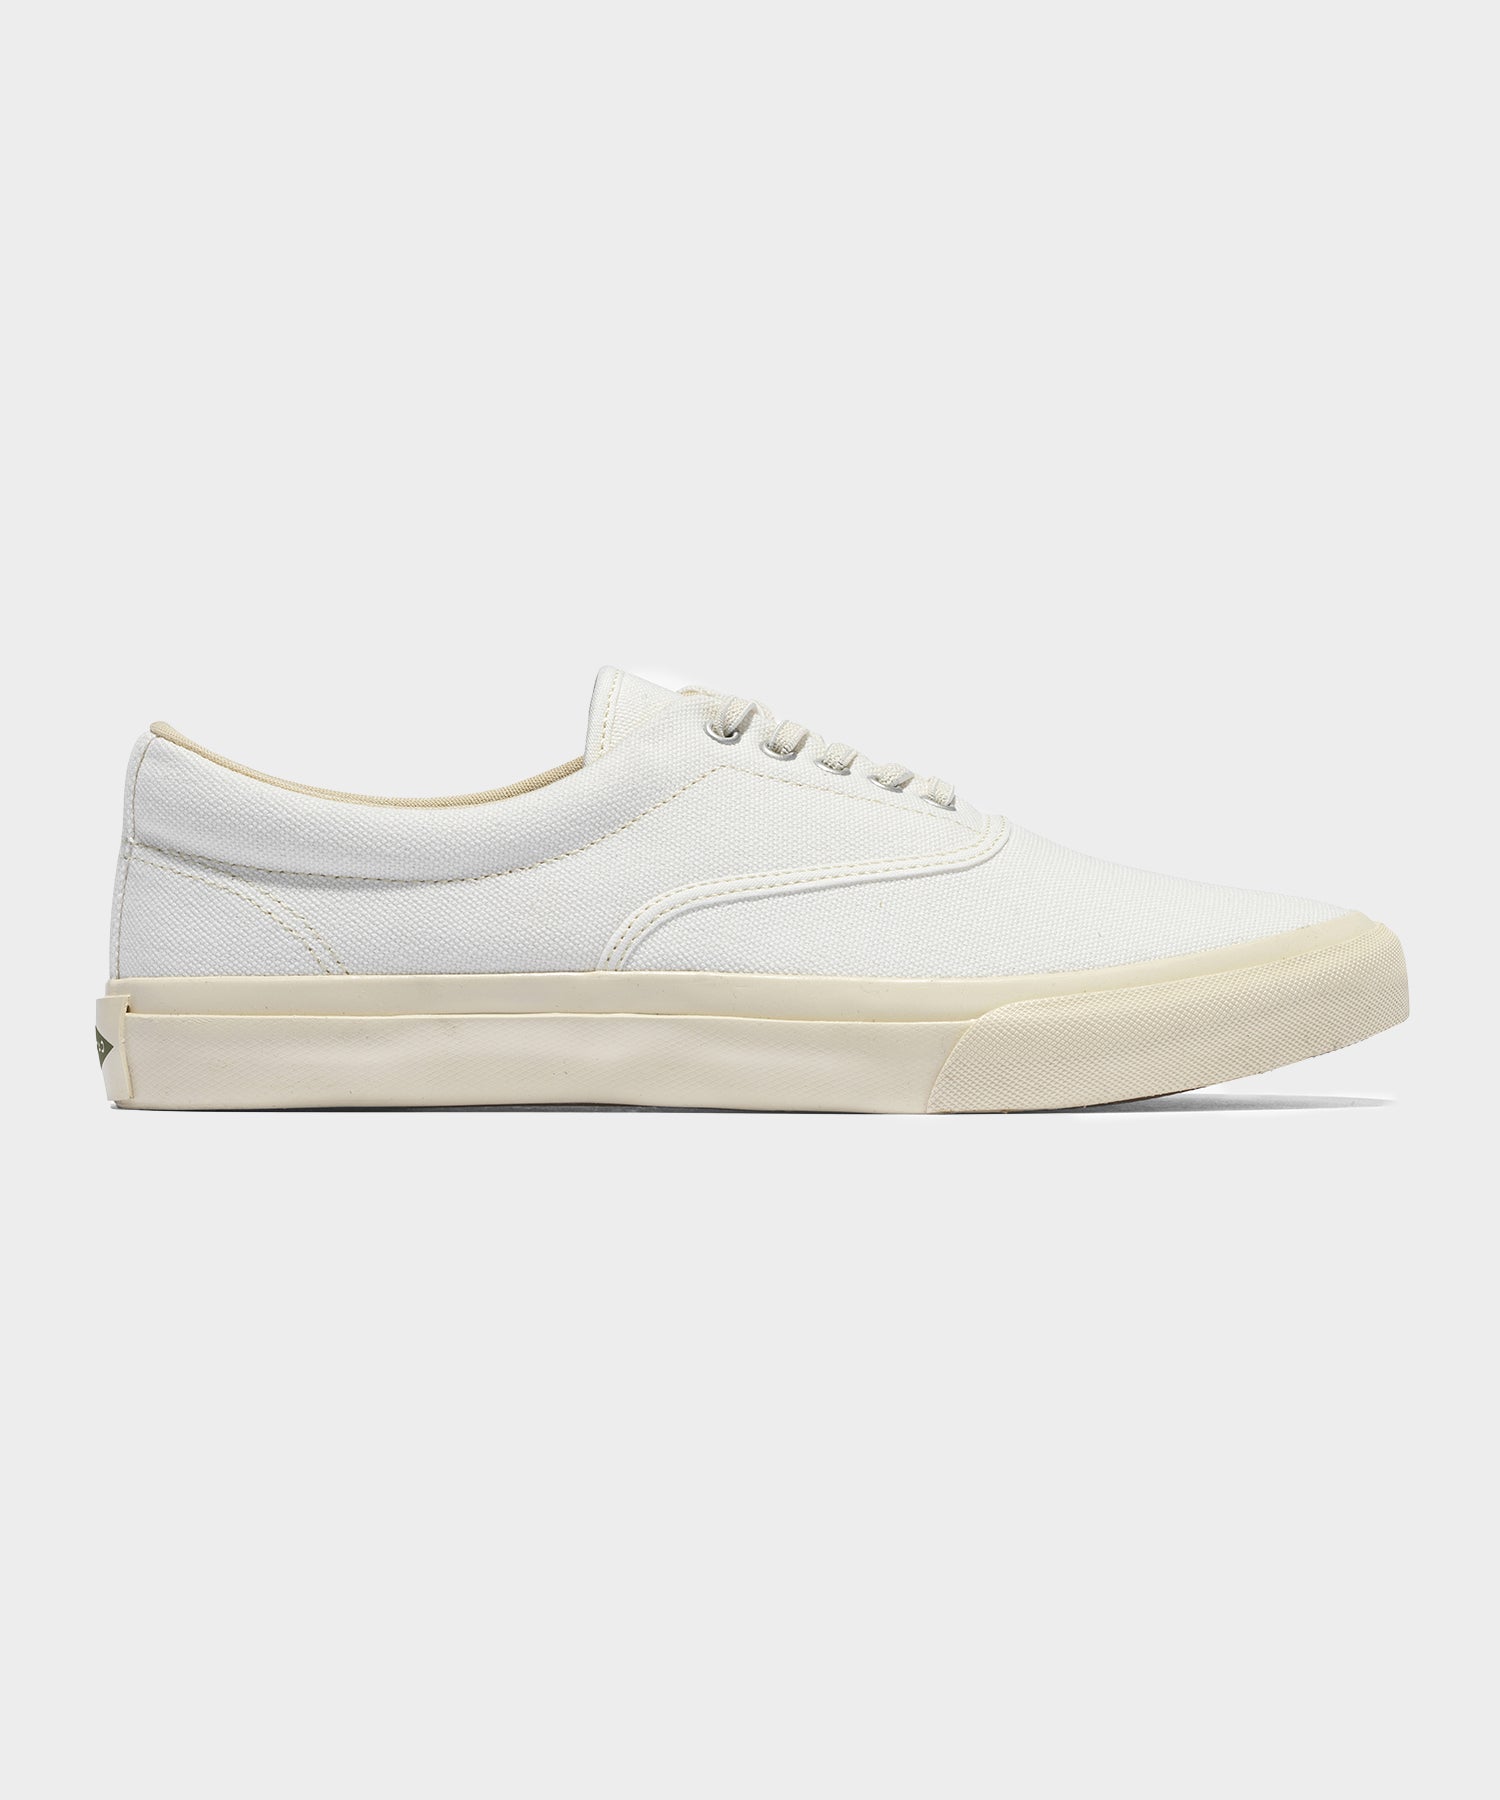 Catchball Original Holiday Low in White